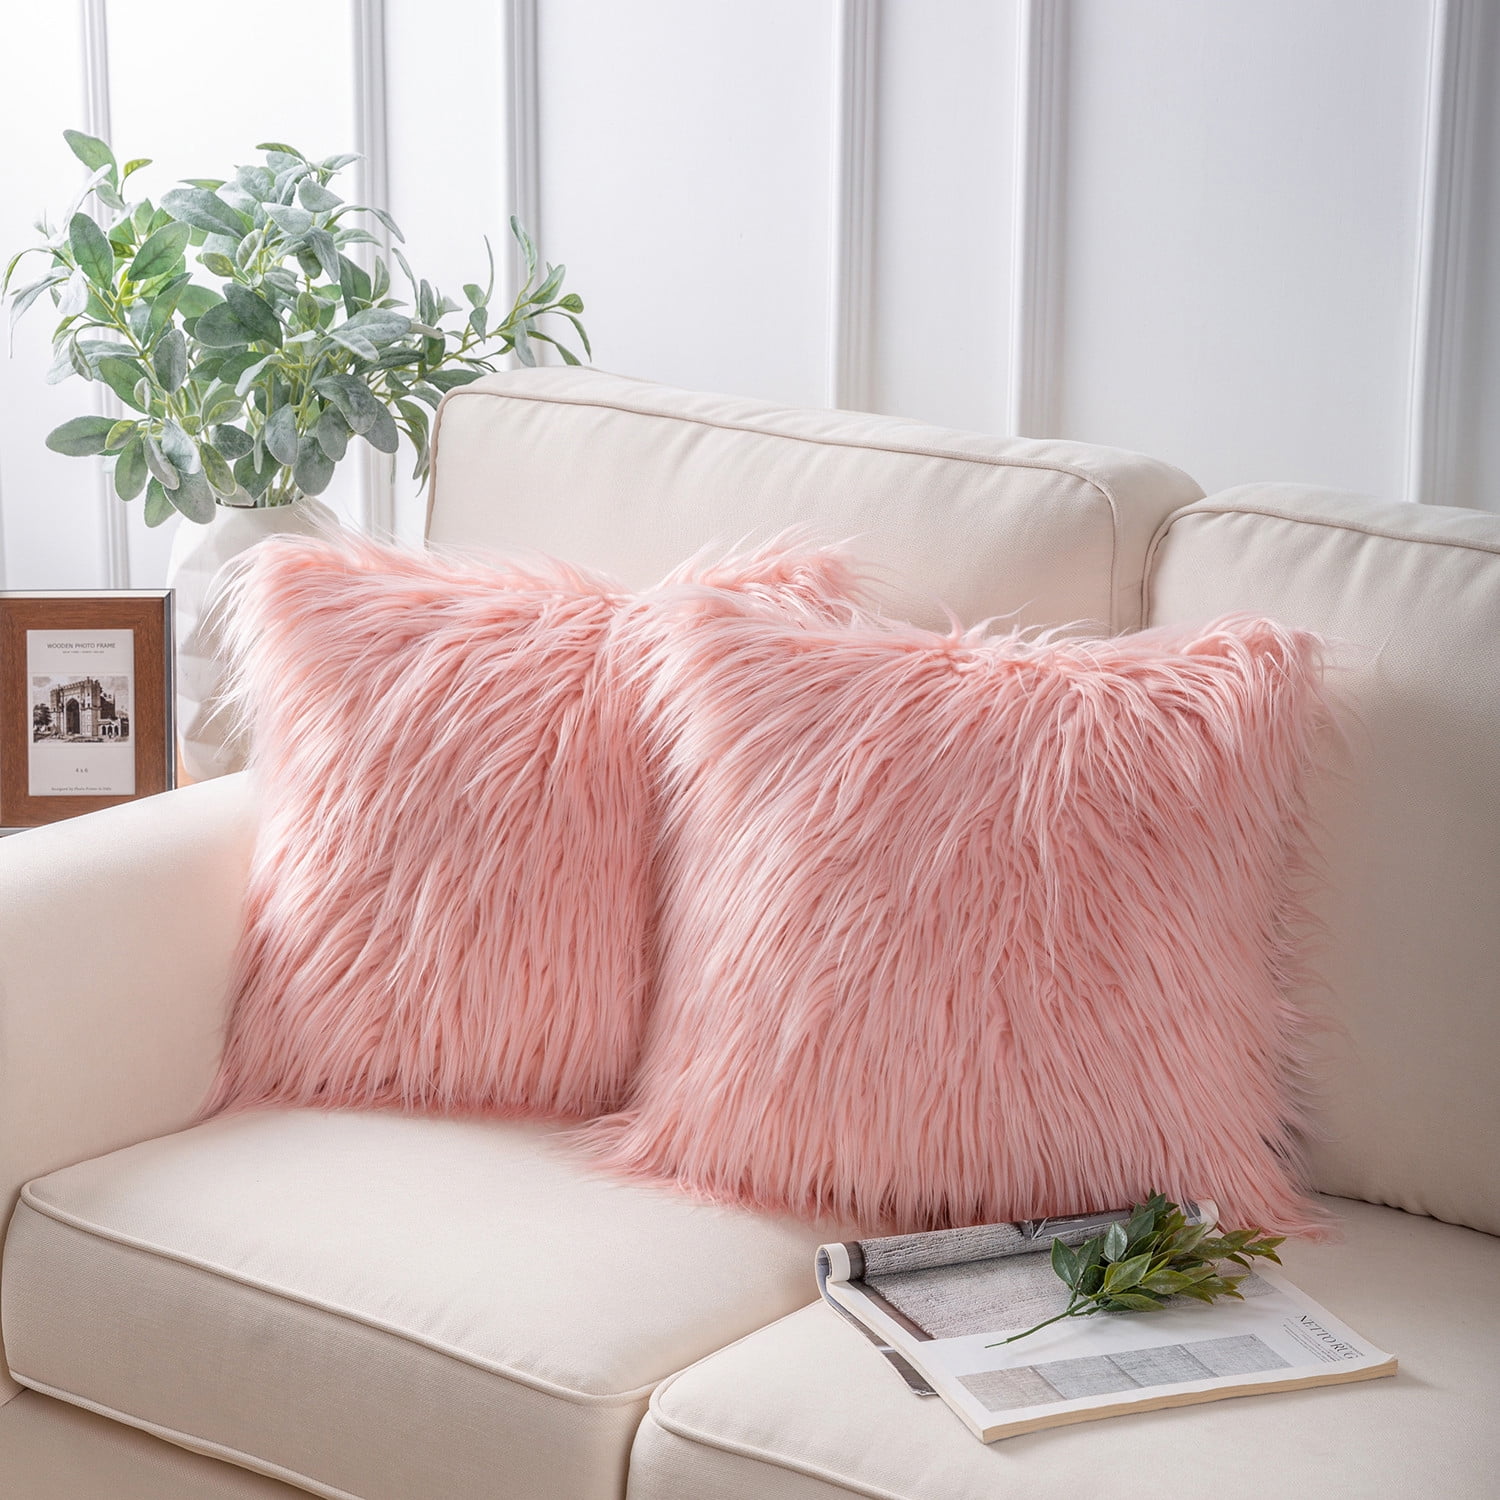 Peshtemania Deep Pink Fluffy Pillows (2packs 20x20) Cute Faux Fur Pillow  Case Decorative for Couch Sofa Fuzzy Throw Pillows Covers for Bedroom